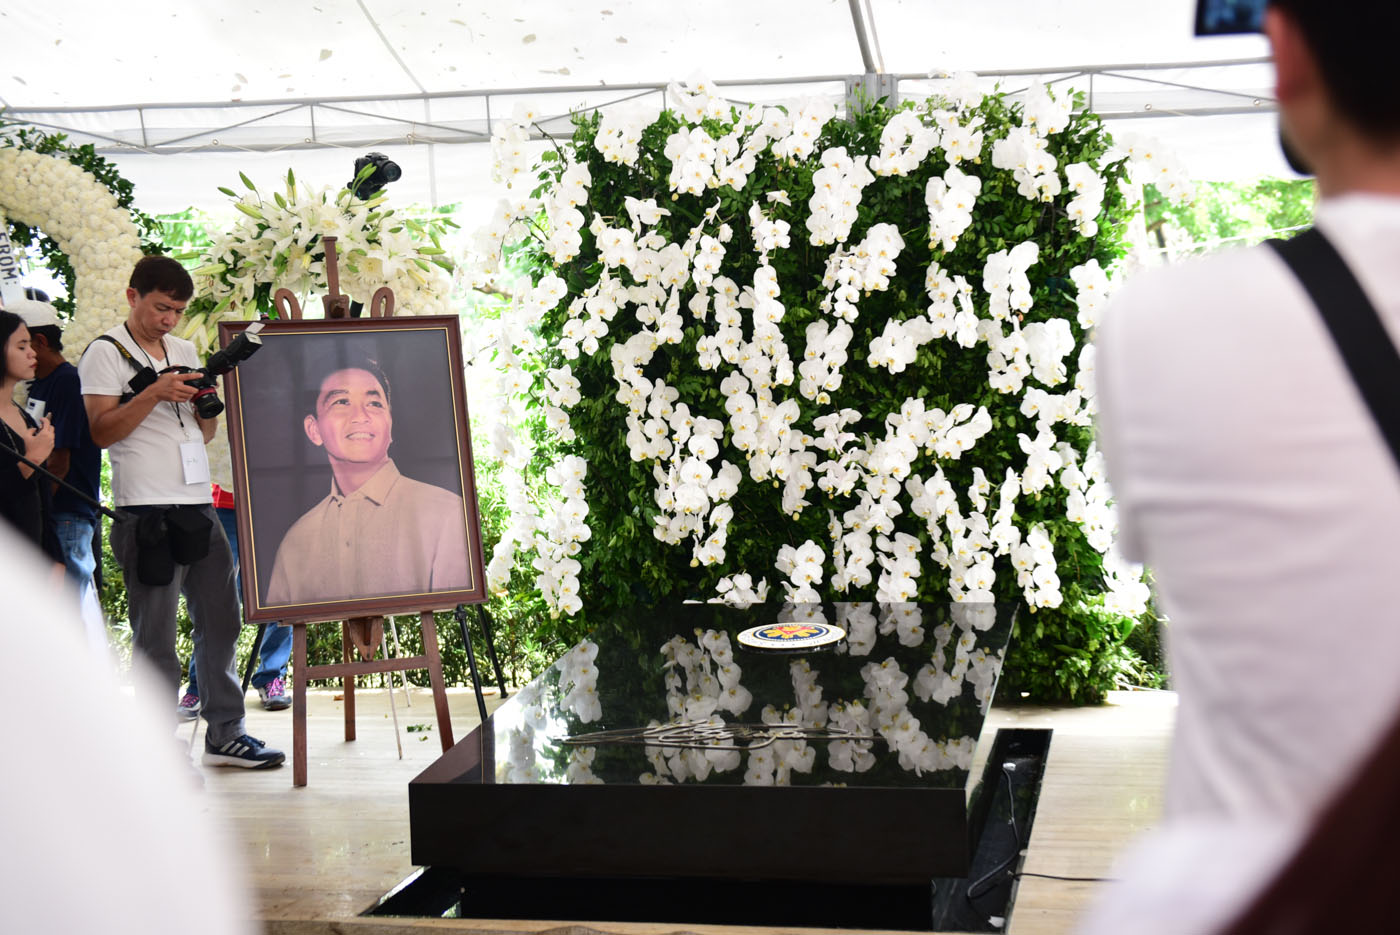 HERE HE LIES. White funeral flowers are on display behind the grave of the late dictator Ferdinand Marcos at the Libingan ng mga Bayani. Photo by Alecs Ongcal/Rappler  